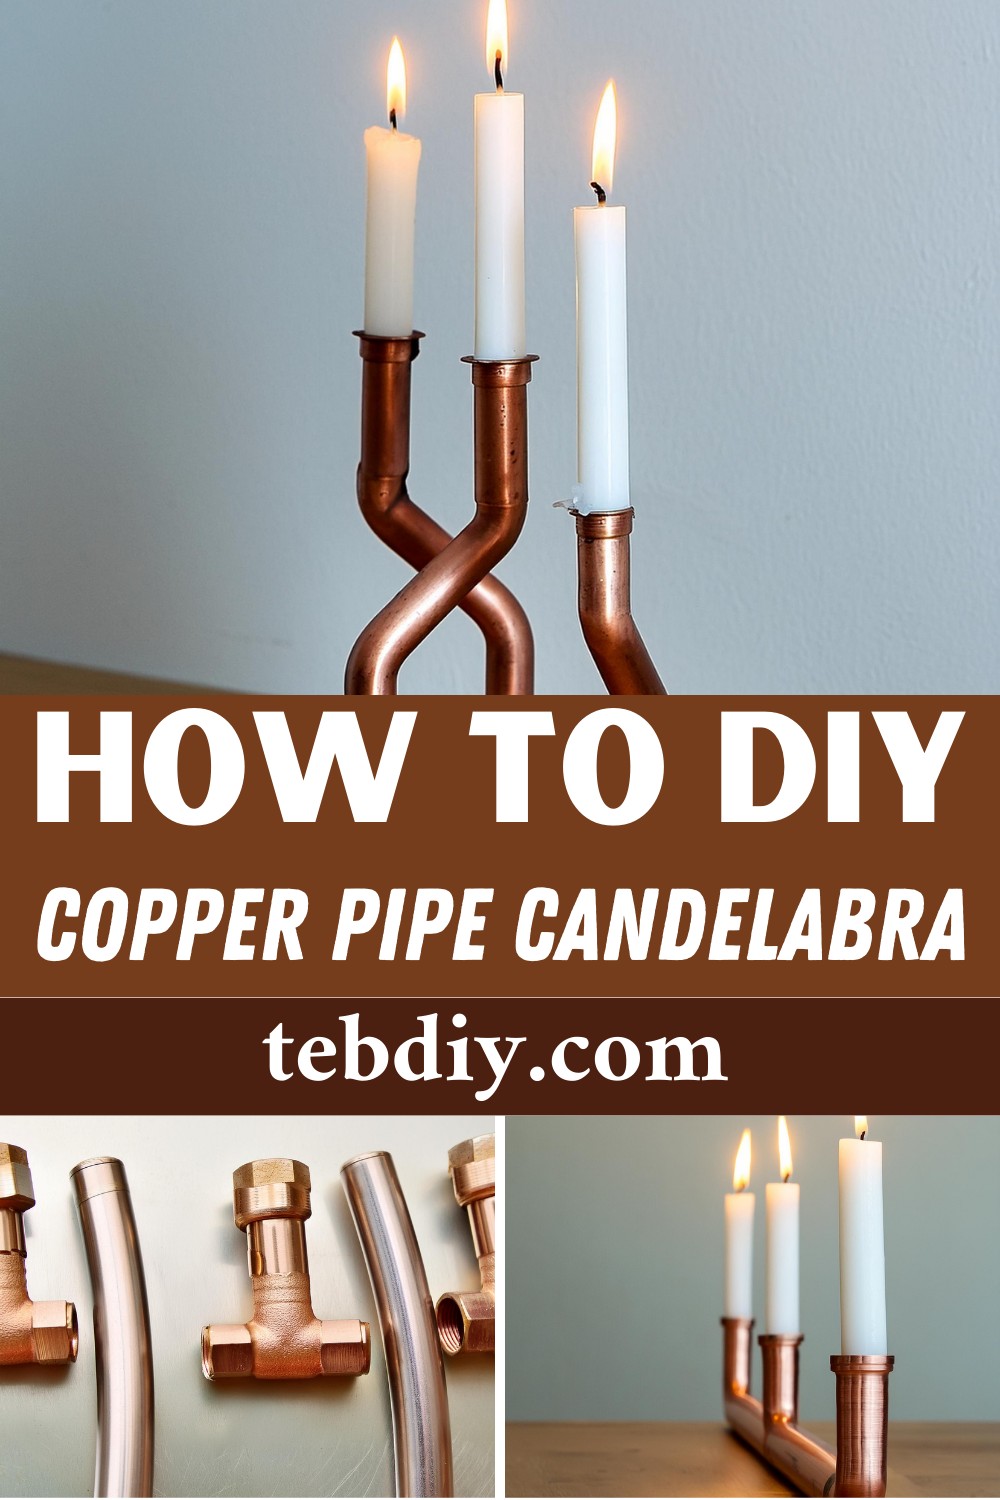 How To DIY Copper Pipe Candelabra